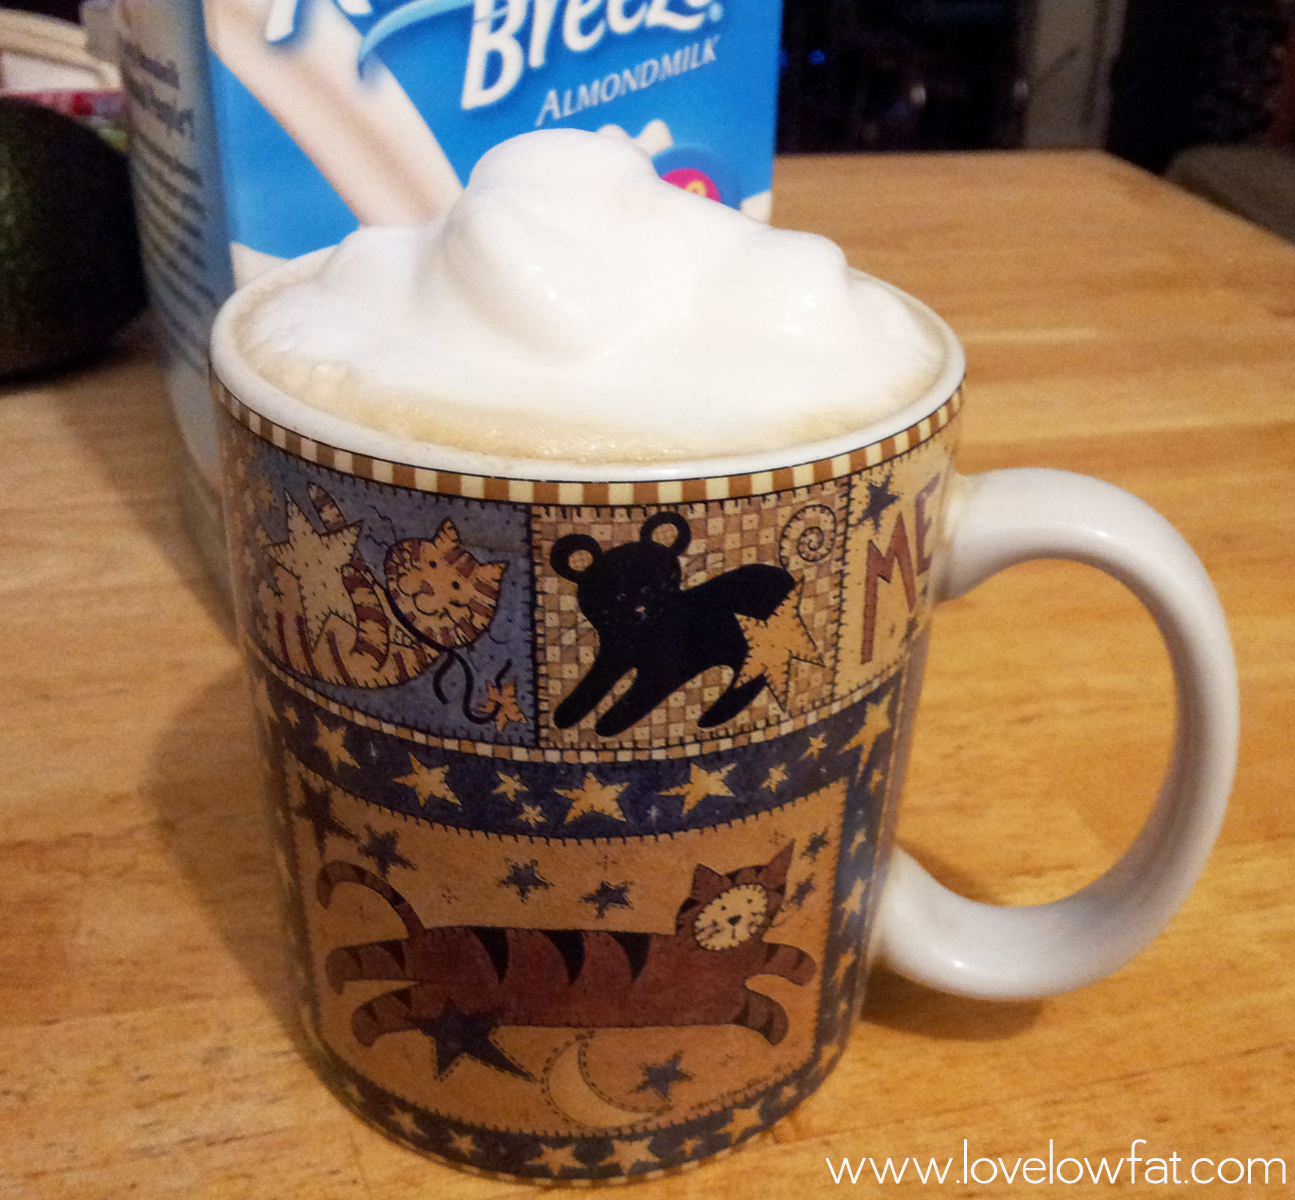 Can You Froth Almond Milk: Getting a Non-Dairy Froth